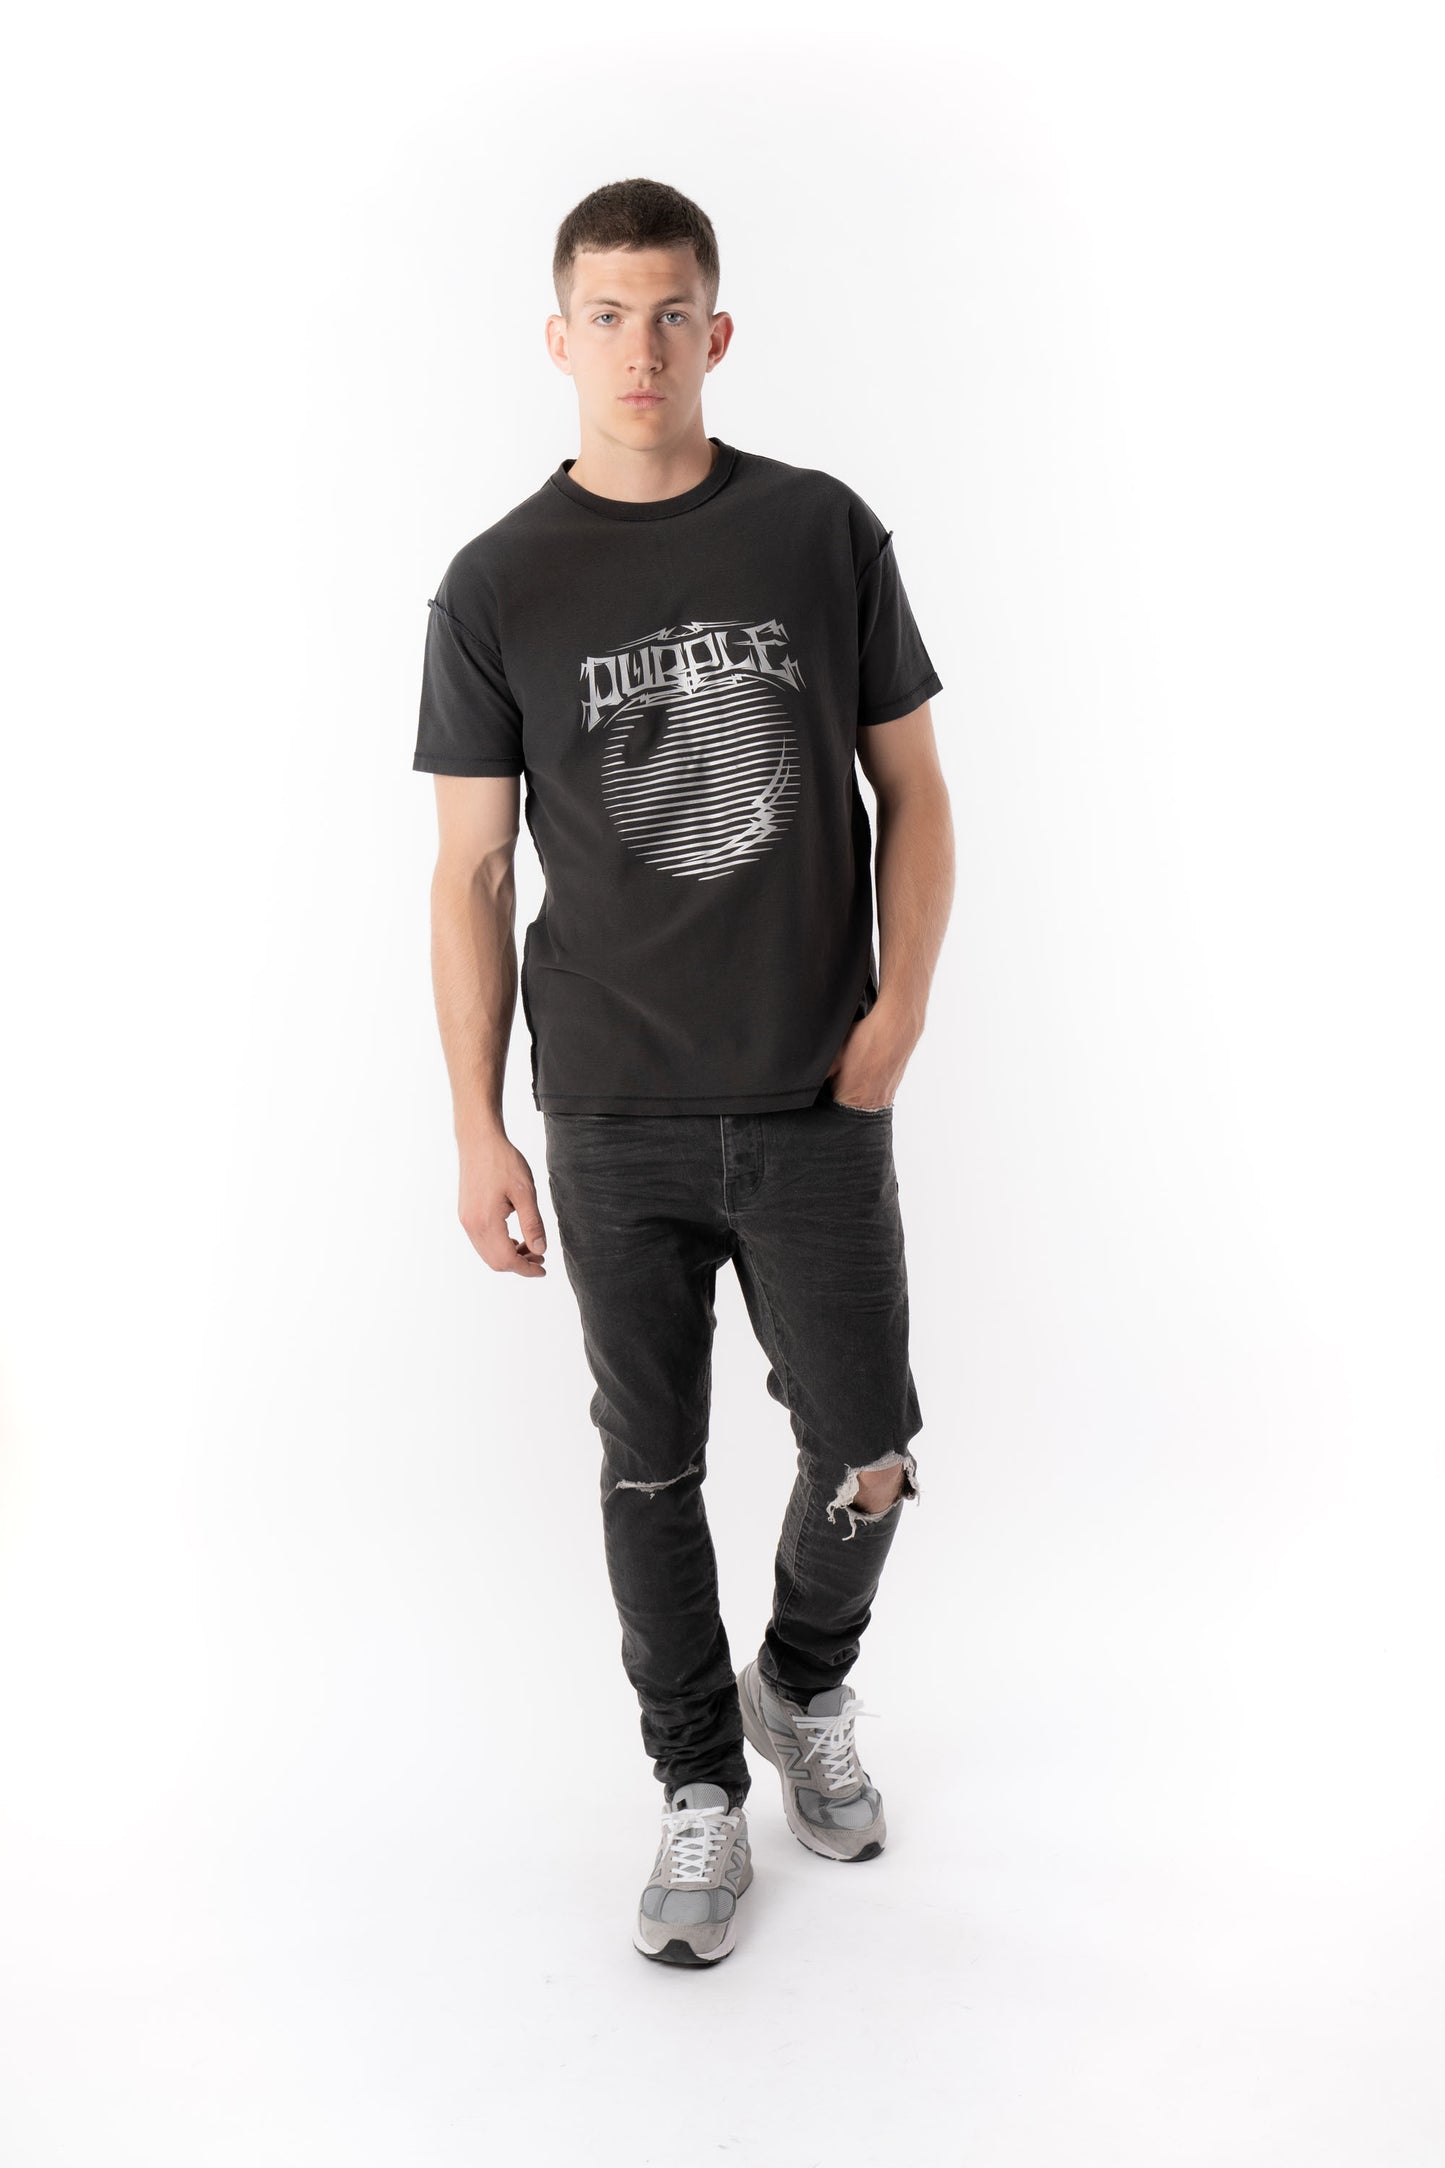 PURPLE BRAND - Men's Relaxed Fit T-Shirt - Style No. P101 - ASTERISM BLACK - Model Styled Pose